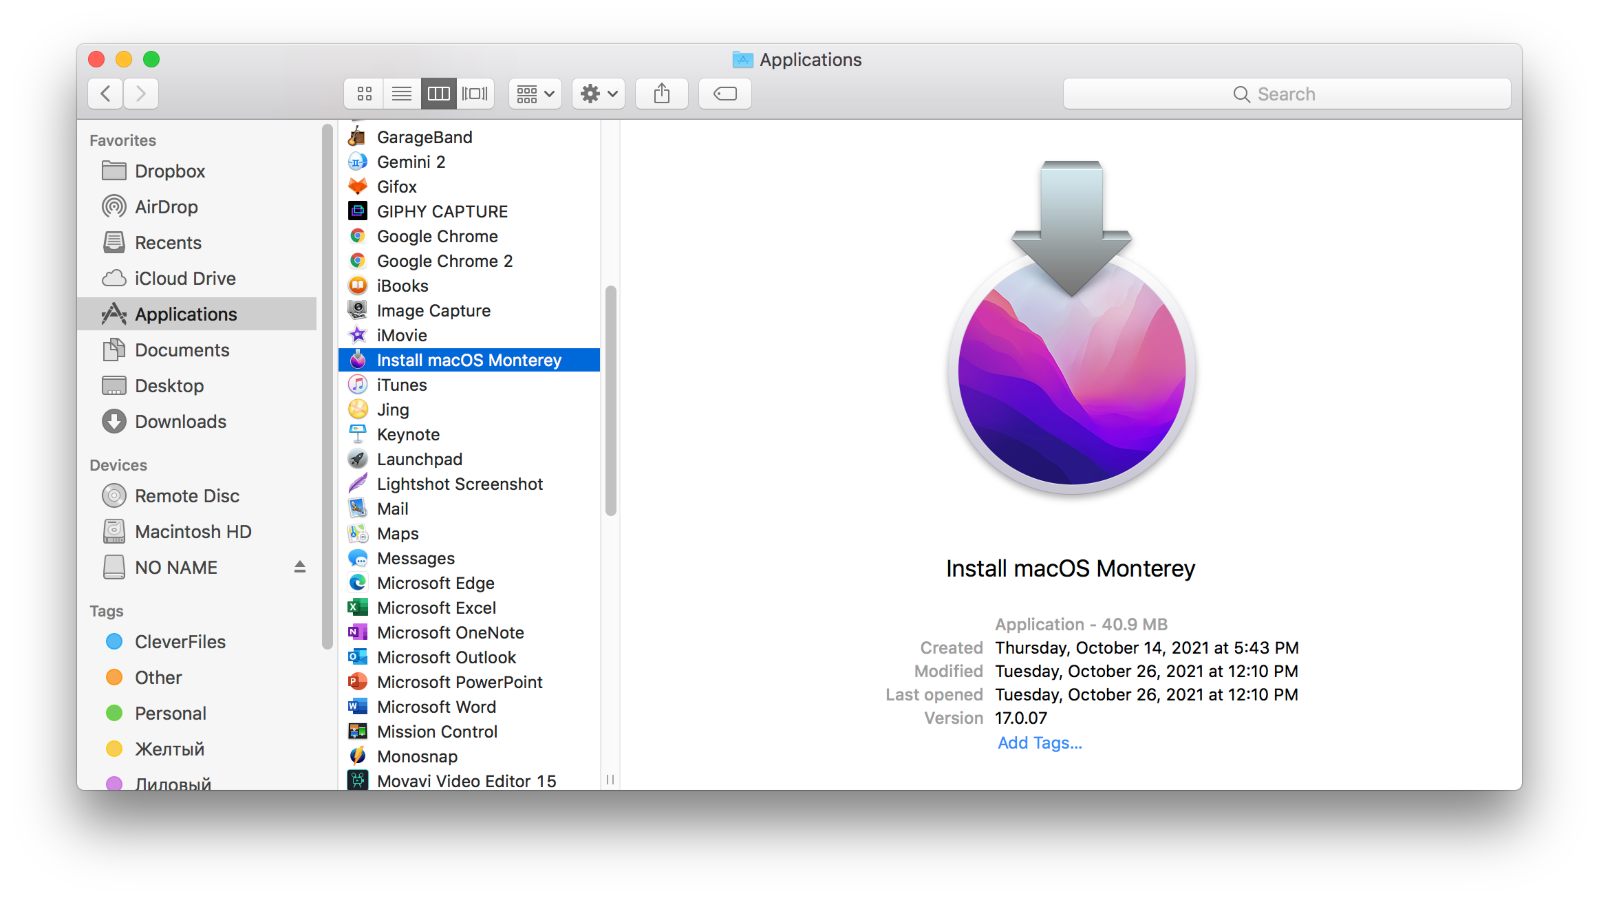 free for mac download Monterey